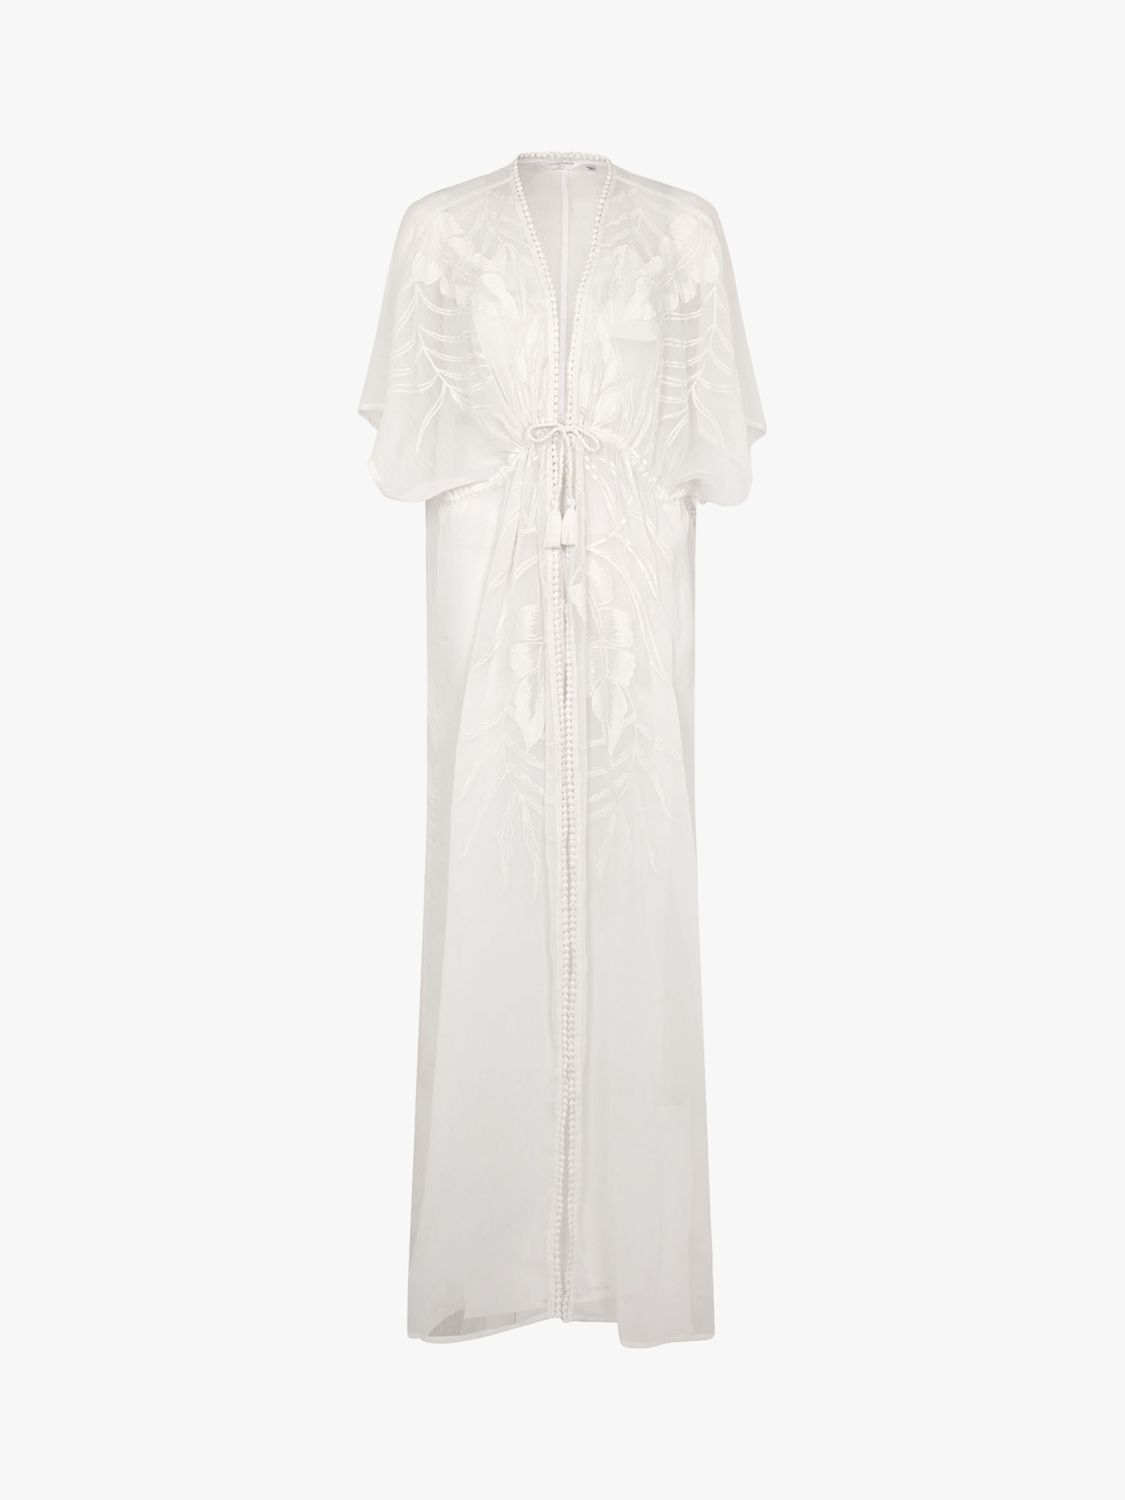 Accessorize Palm Embroidered Kaftan, Ivory, XS